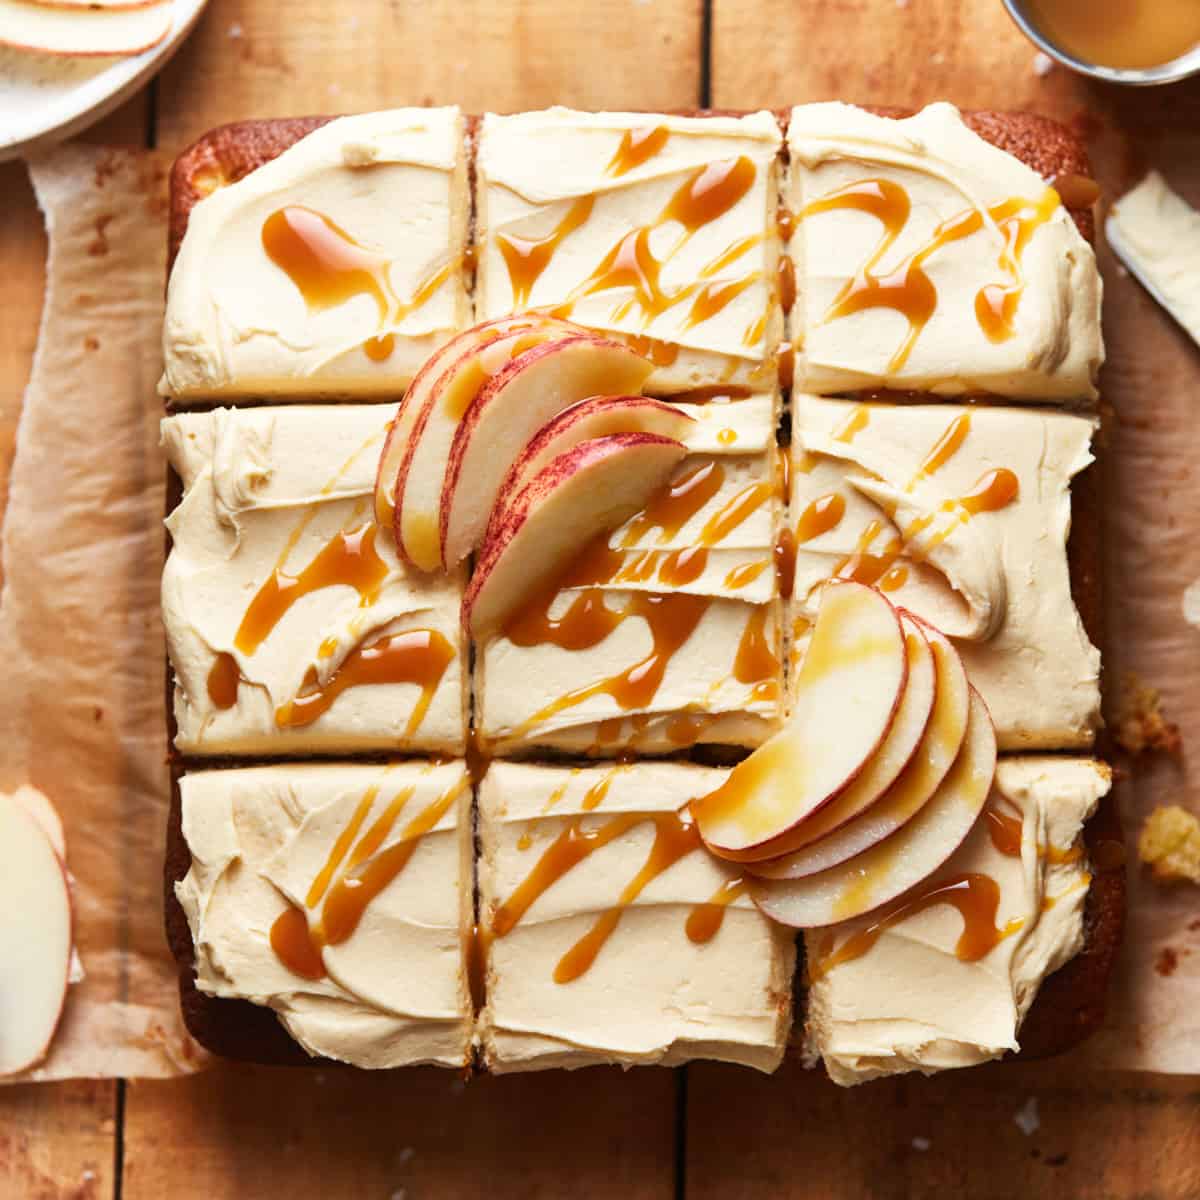 Applesauce Cake with Caramel Frosting - Wyse Guide